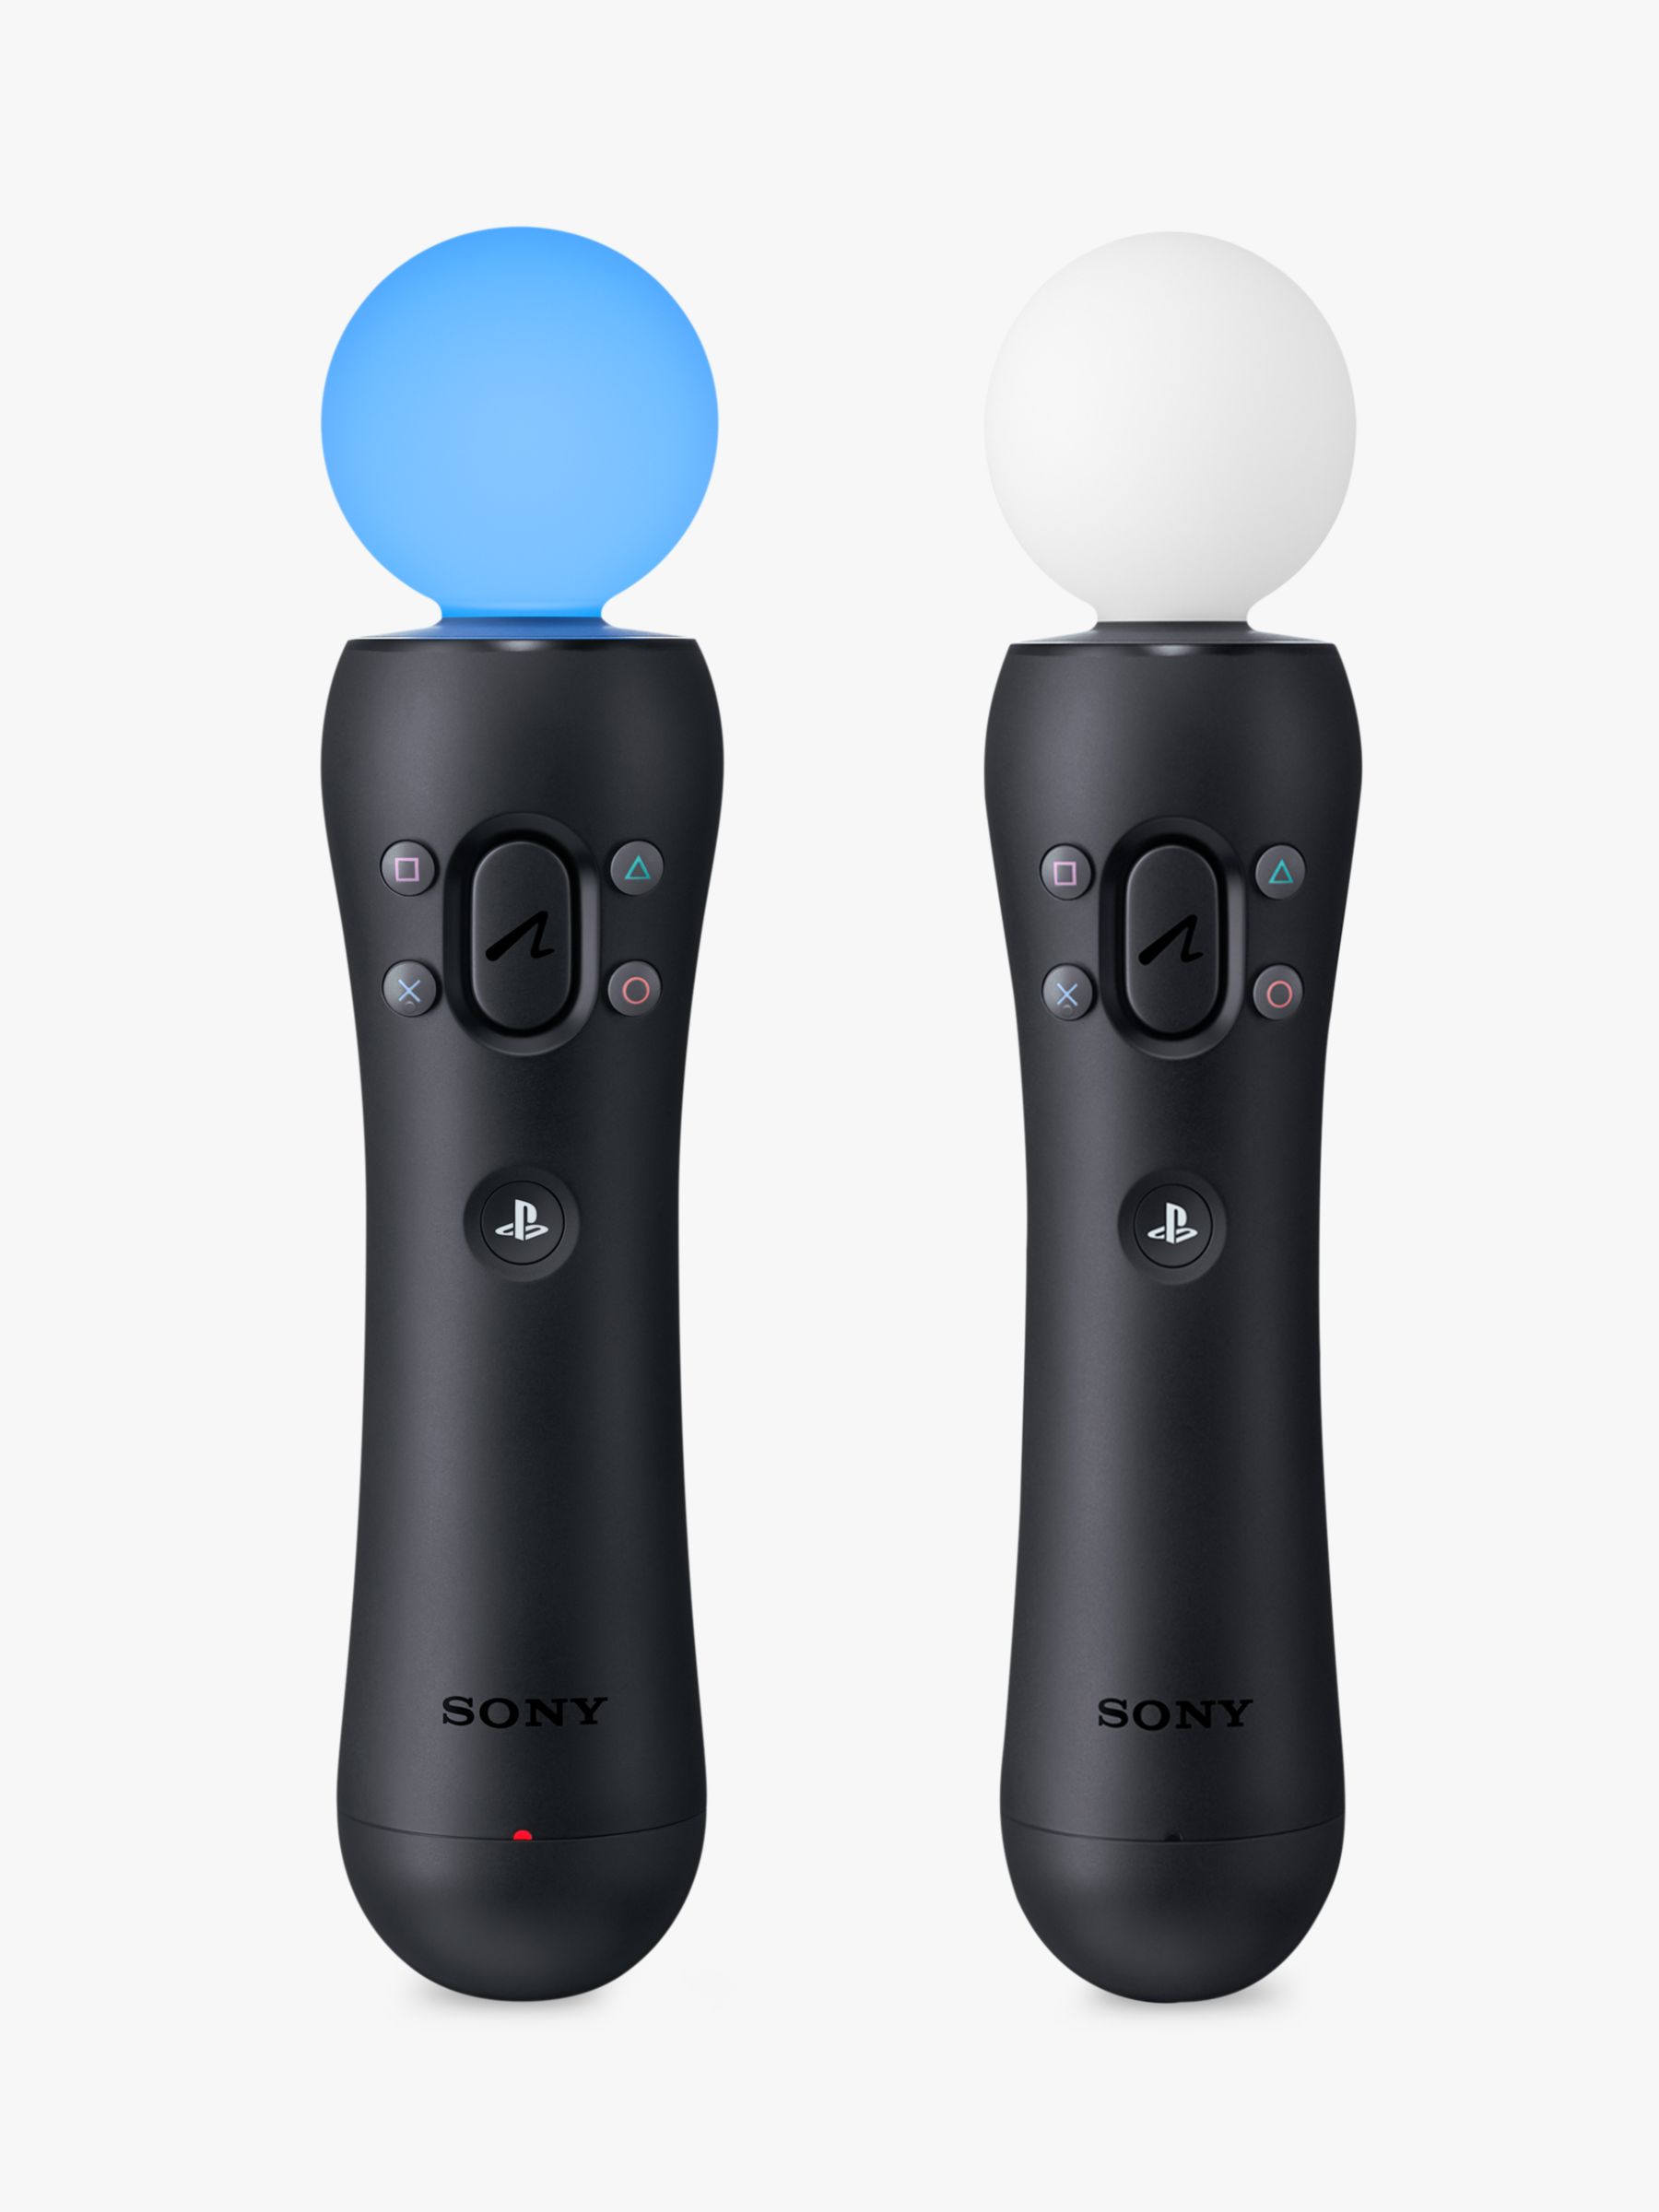 controller sony playstation move twin pack